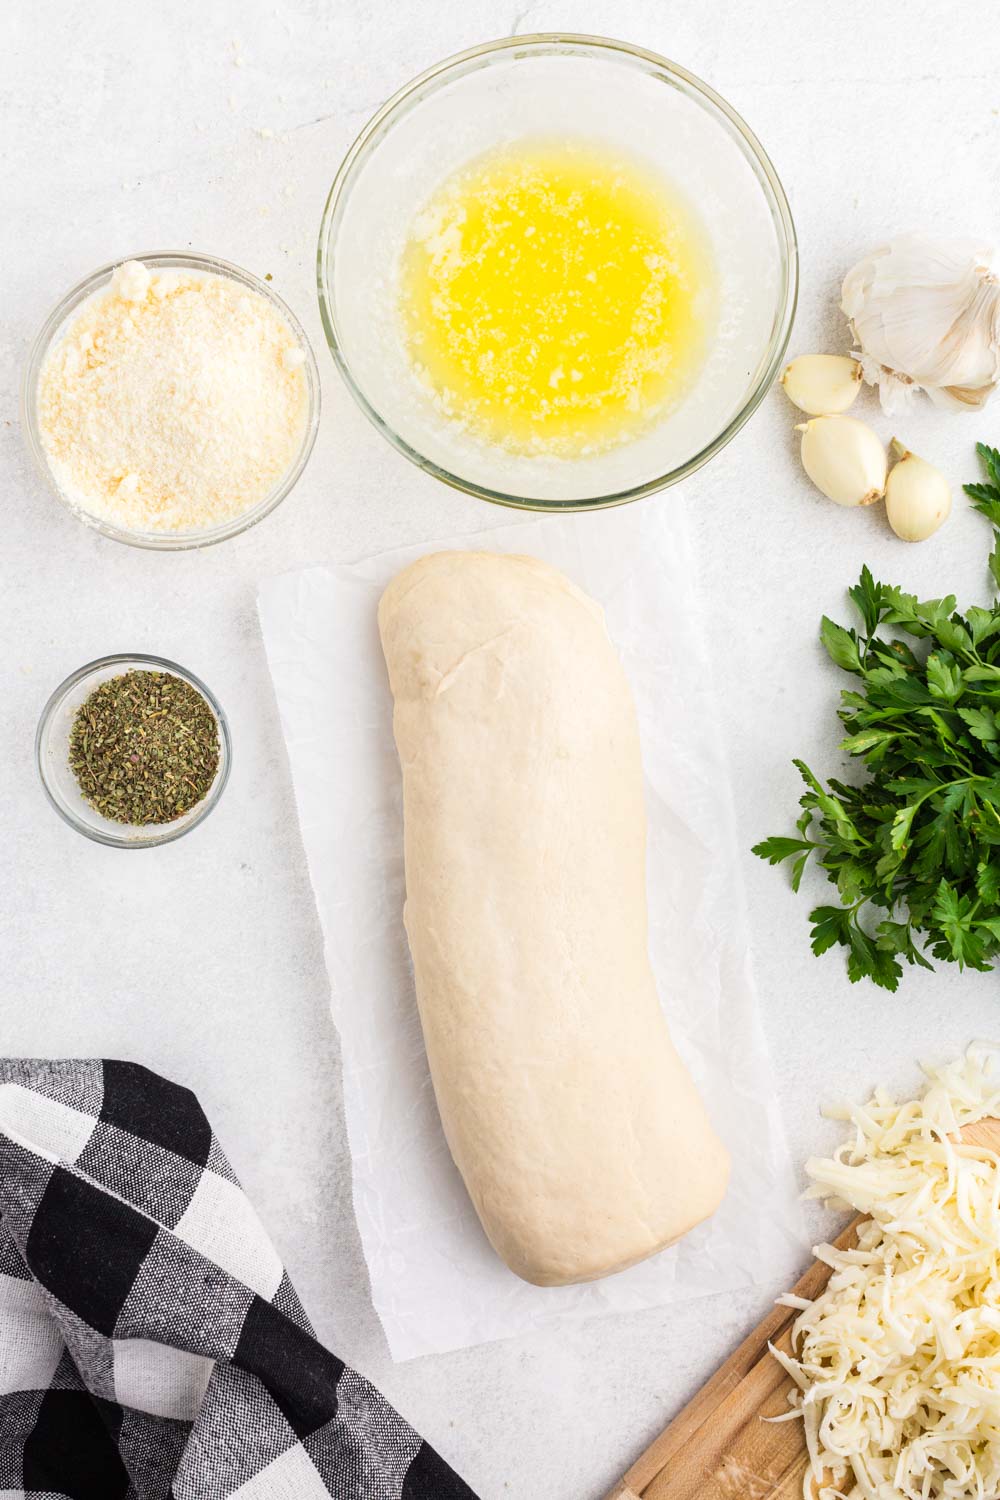 Bread dough on parchment paper, grated mozzarella on wooden kitchen board, fresh parsley, whole garlic cloves, bowl of melted butter, bowl of grated parmesan cheese, small bowl of Italian seasoning, black and white checkered linen, on a white marble surface. 